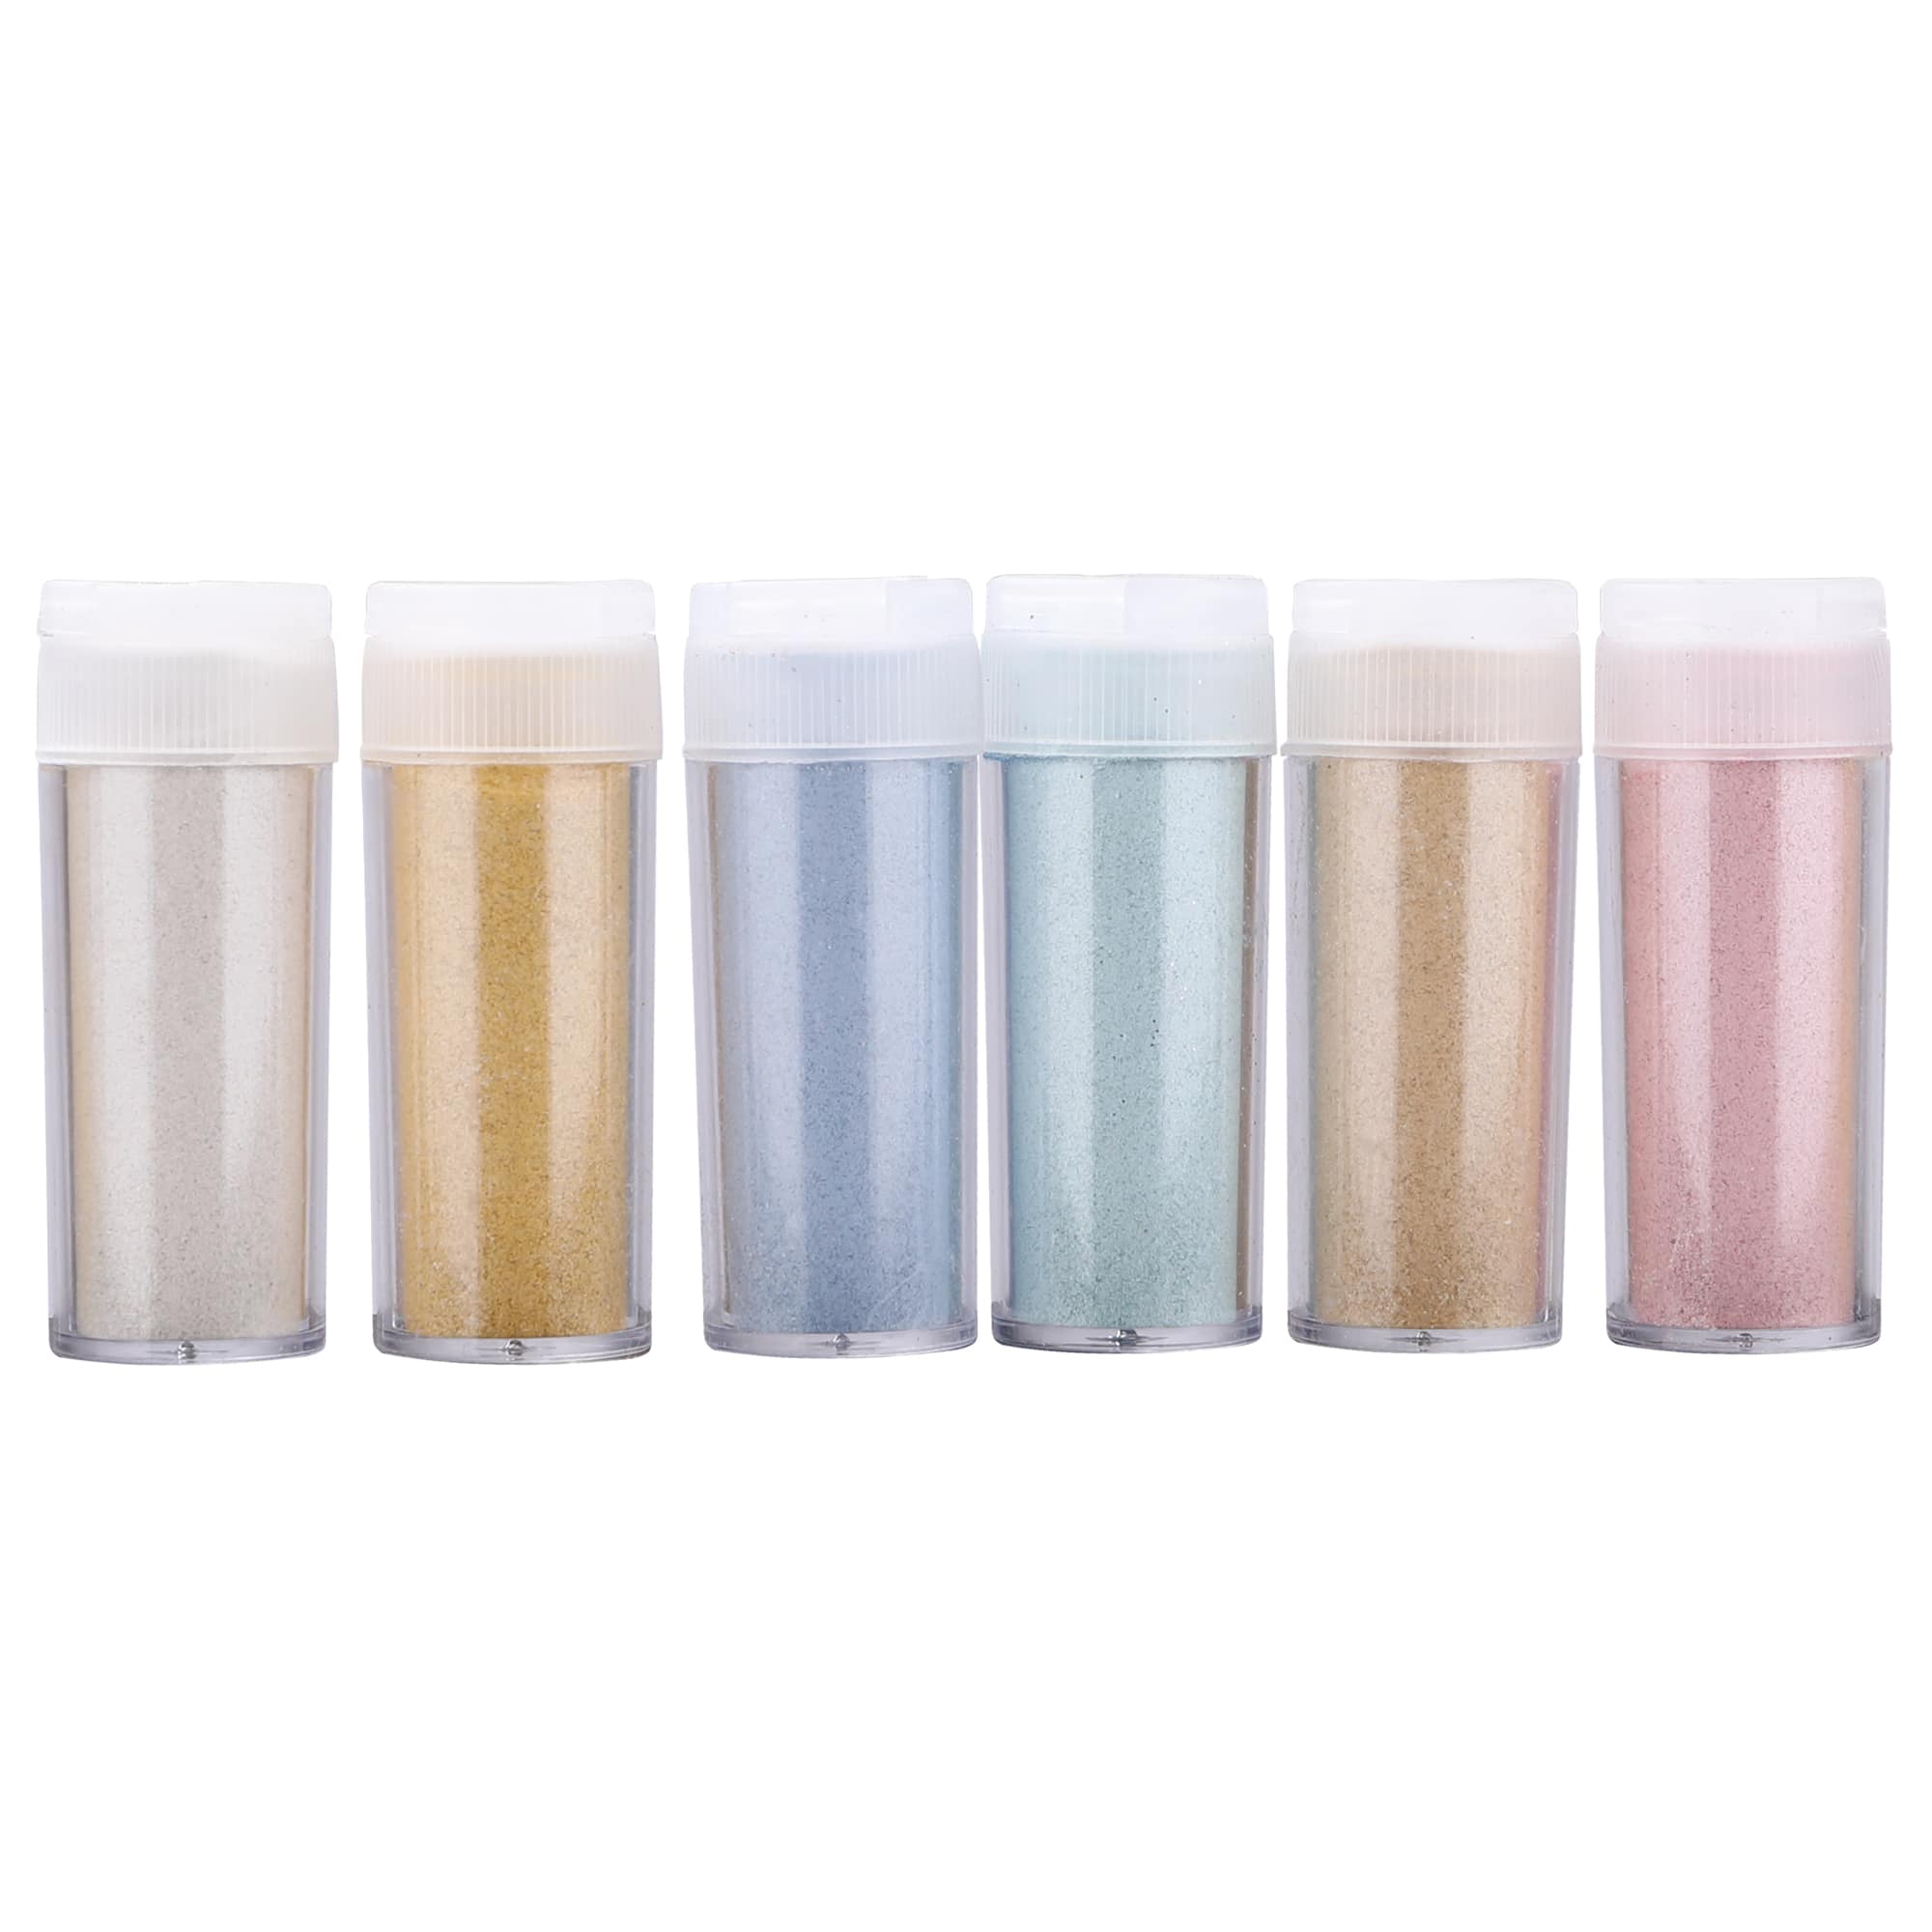 6 Packs: 6 ct. (36 total) Pastel Mica Powder by Recollections&#x2122;